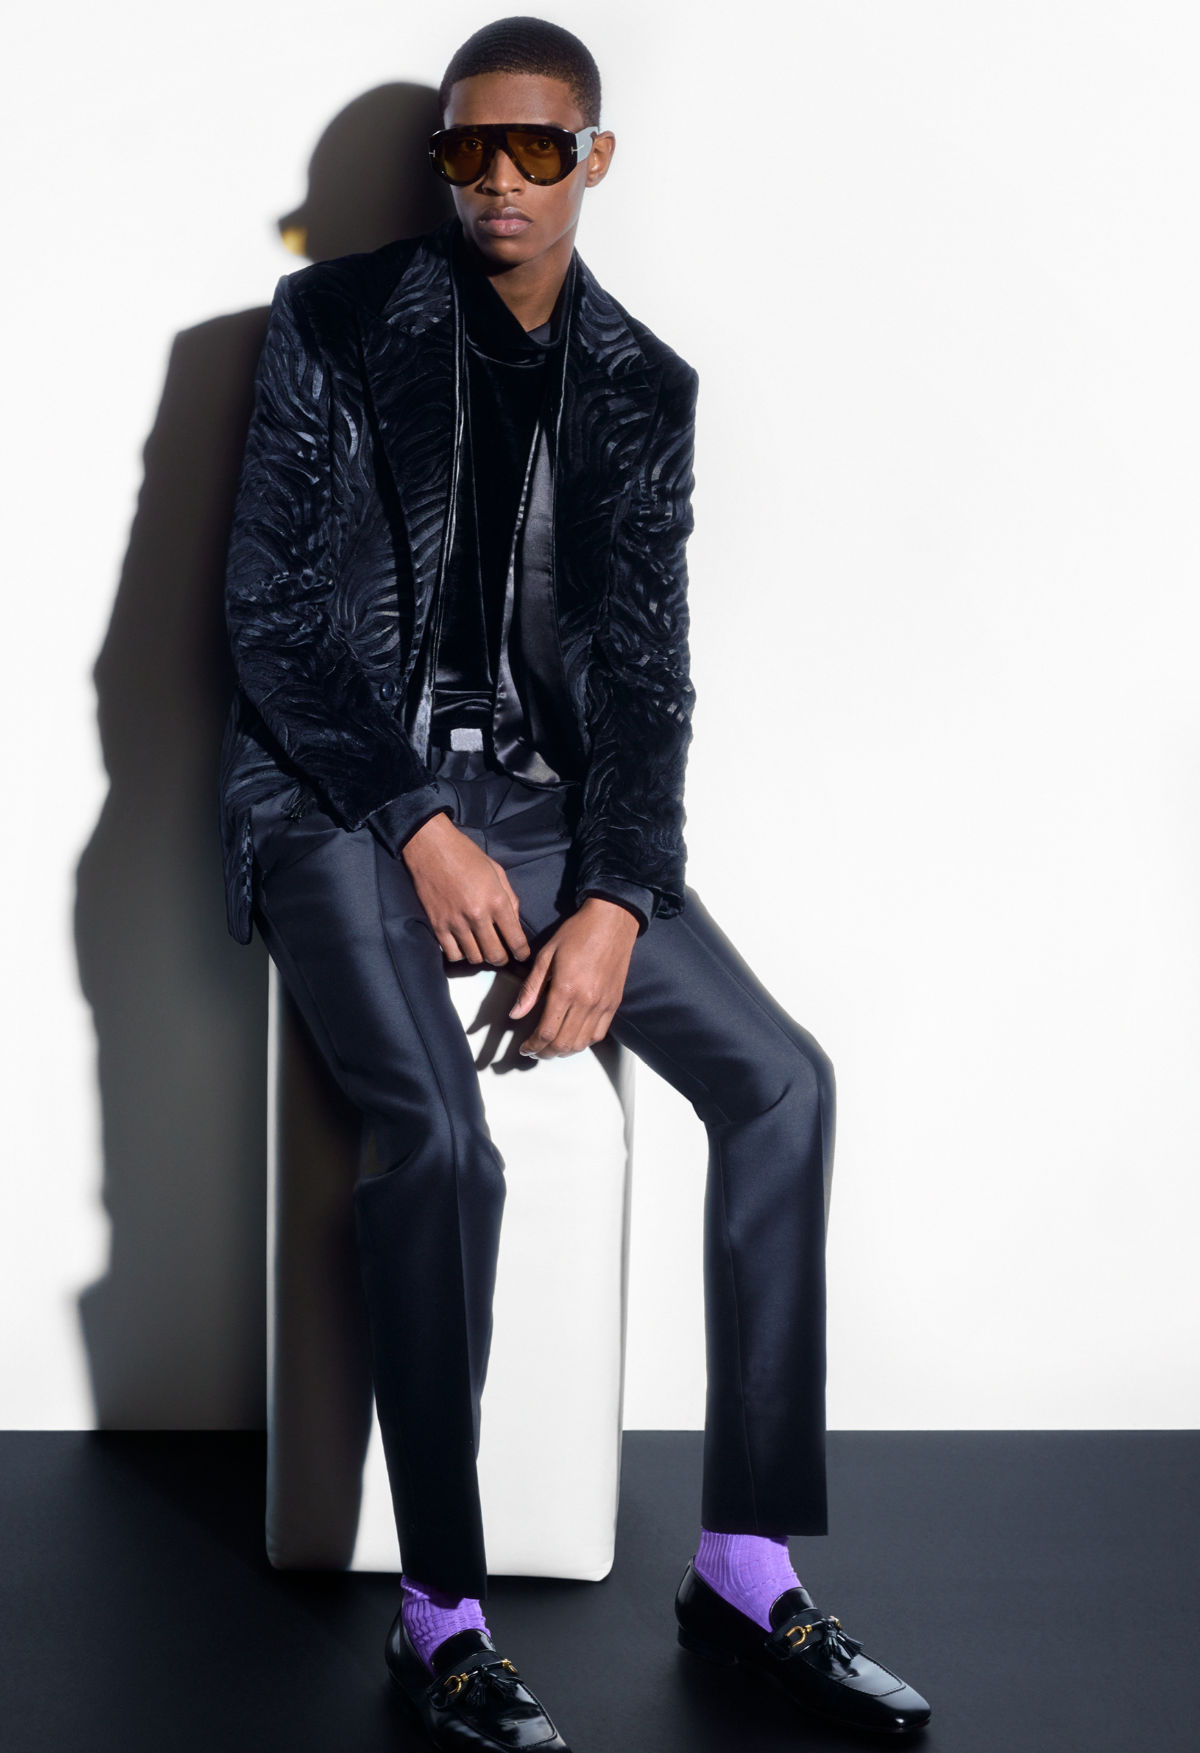 Tom Ford Presents His New Autumn/Winter 2022 Menswear Collection